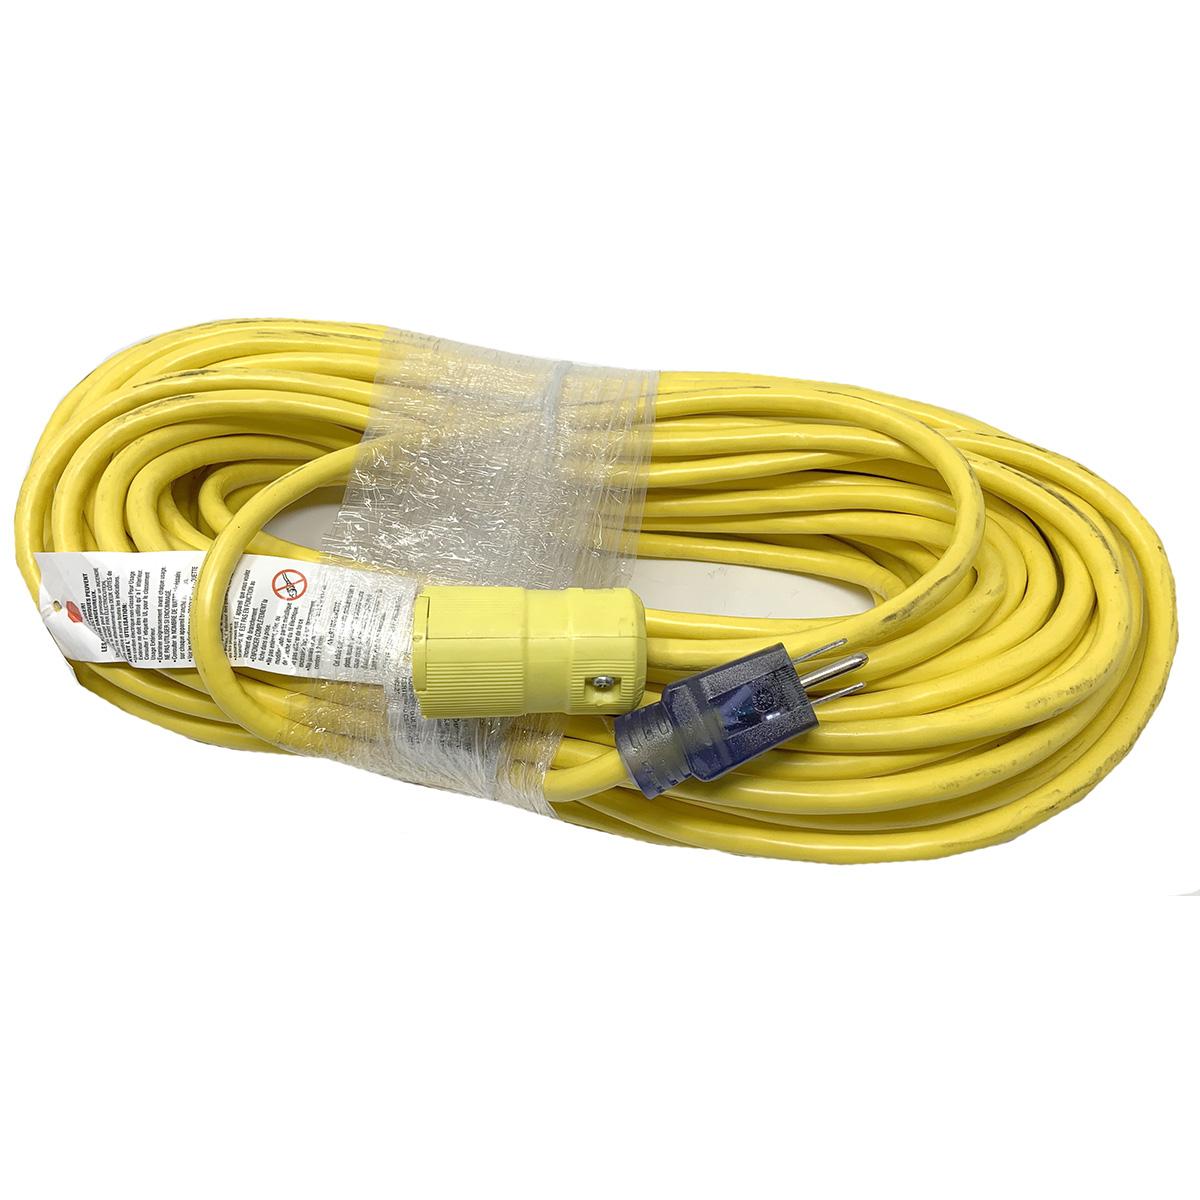 100Ft., 14/3 Sjtw, 300 Volt Extension Cord, Yellow, Female Twist-Lock Included